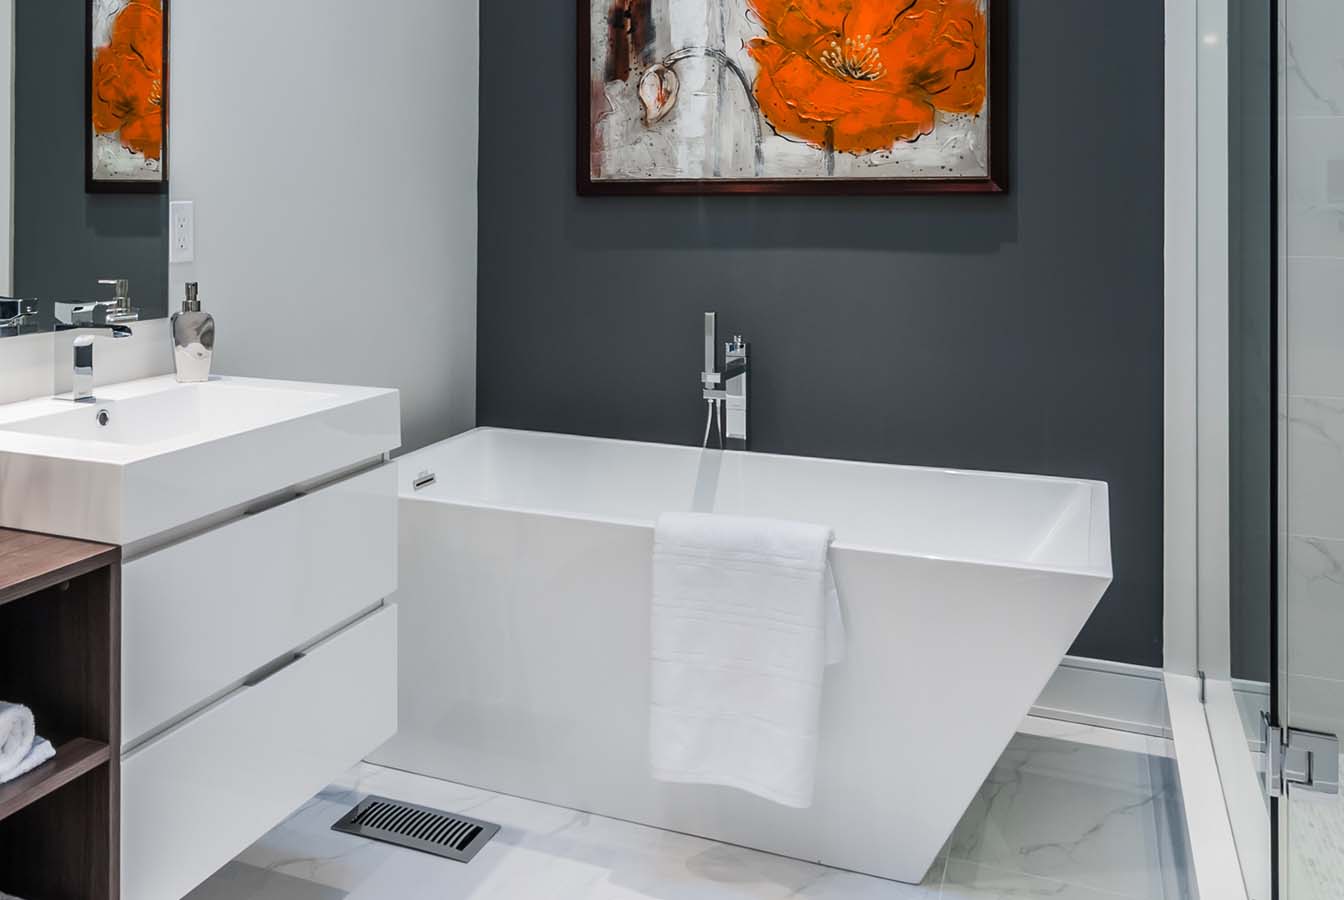 White acrylic square bathtub with grey wall and orange abstract painting